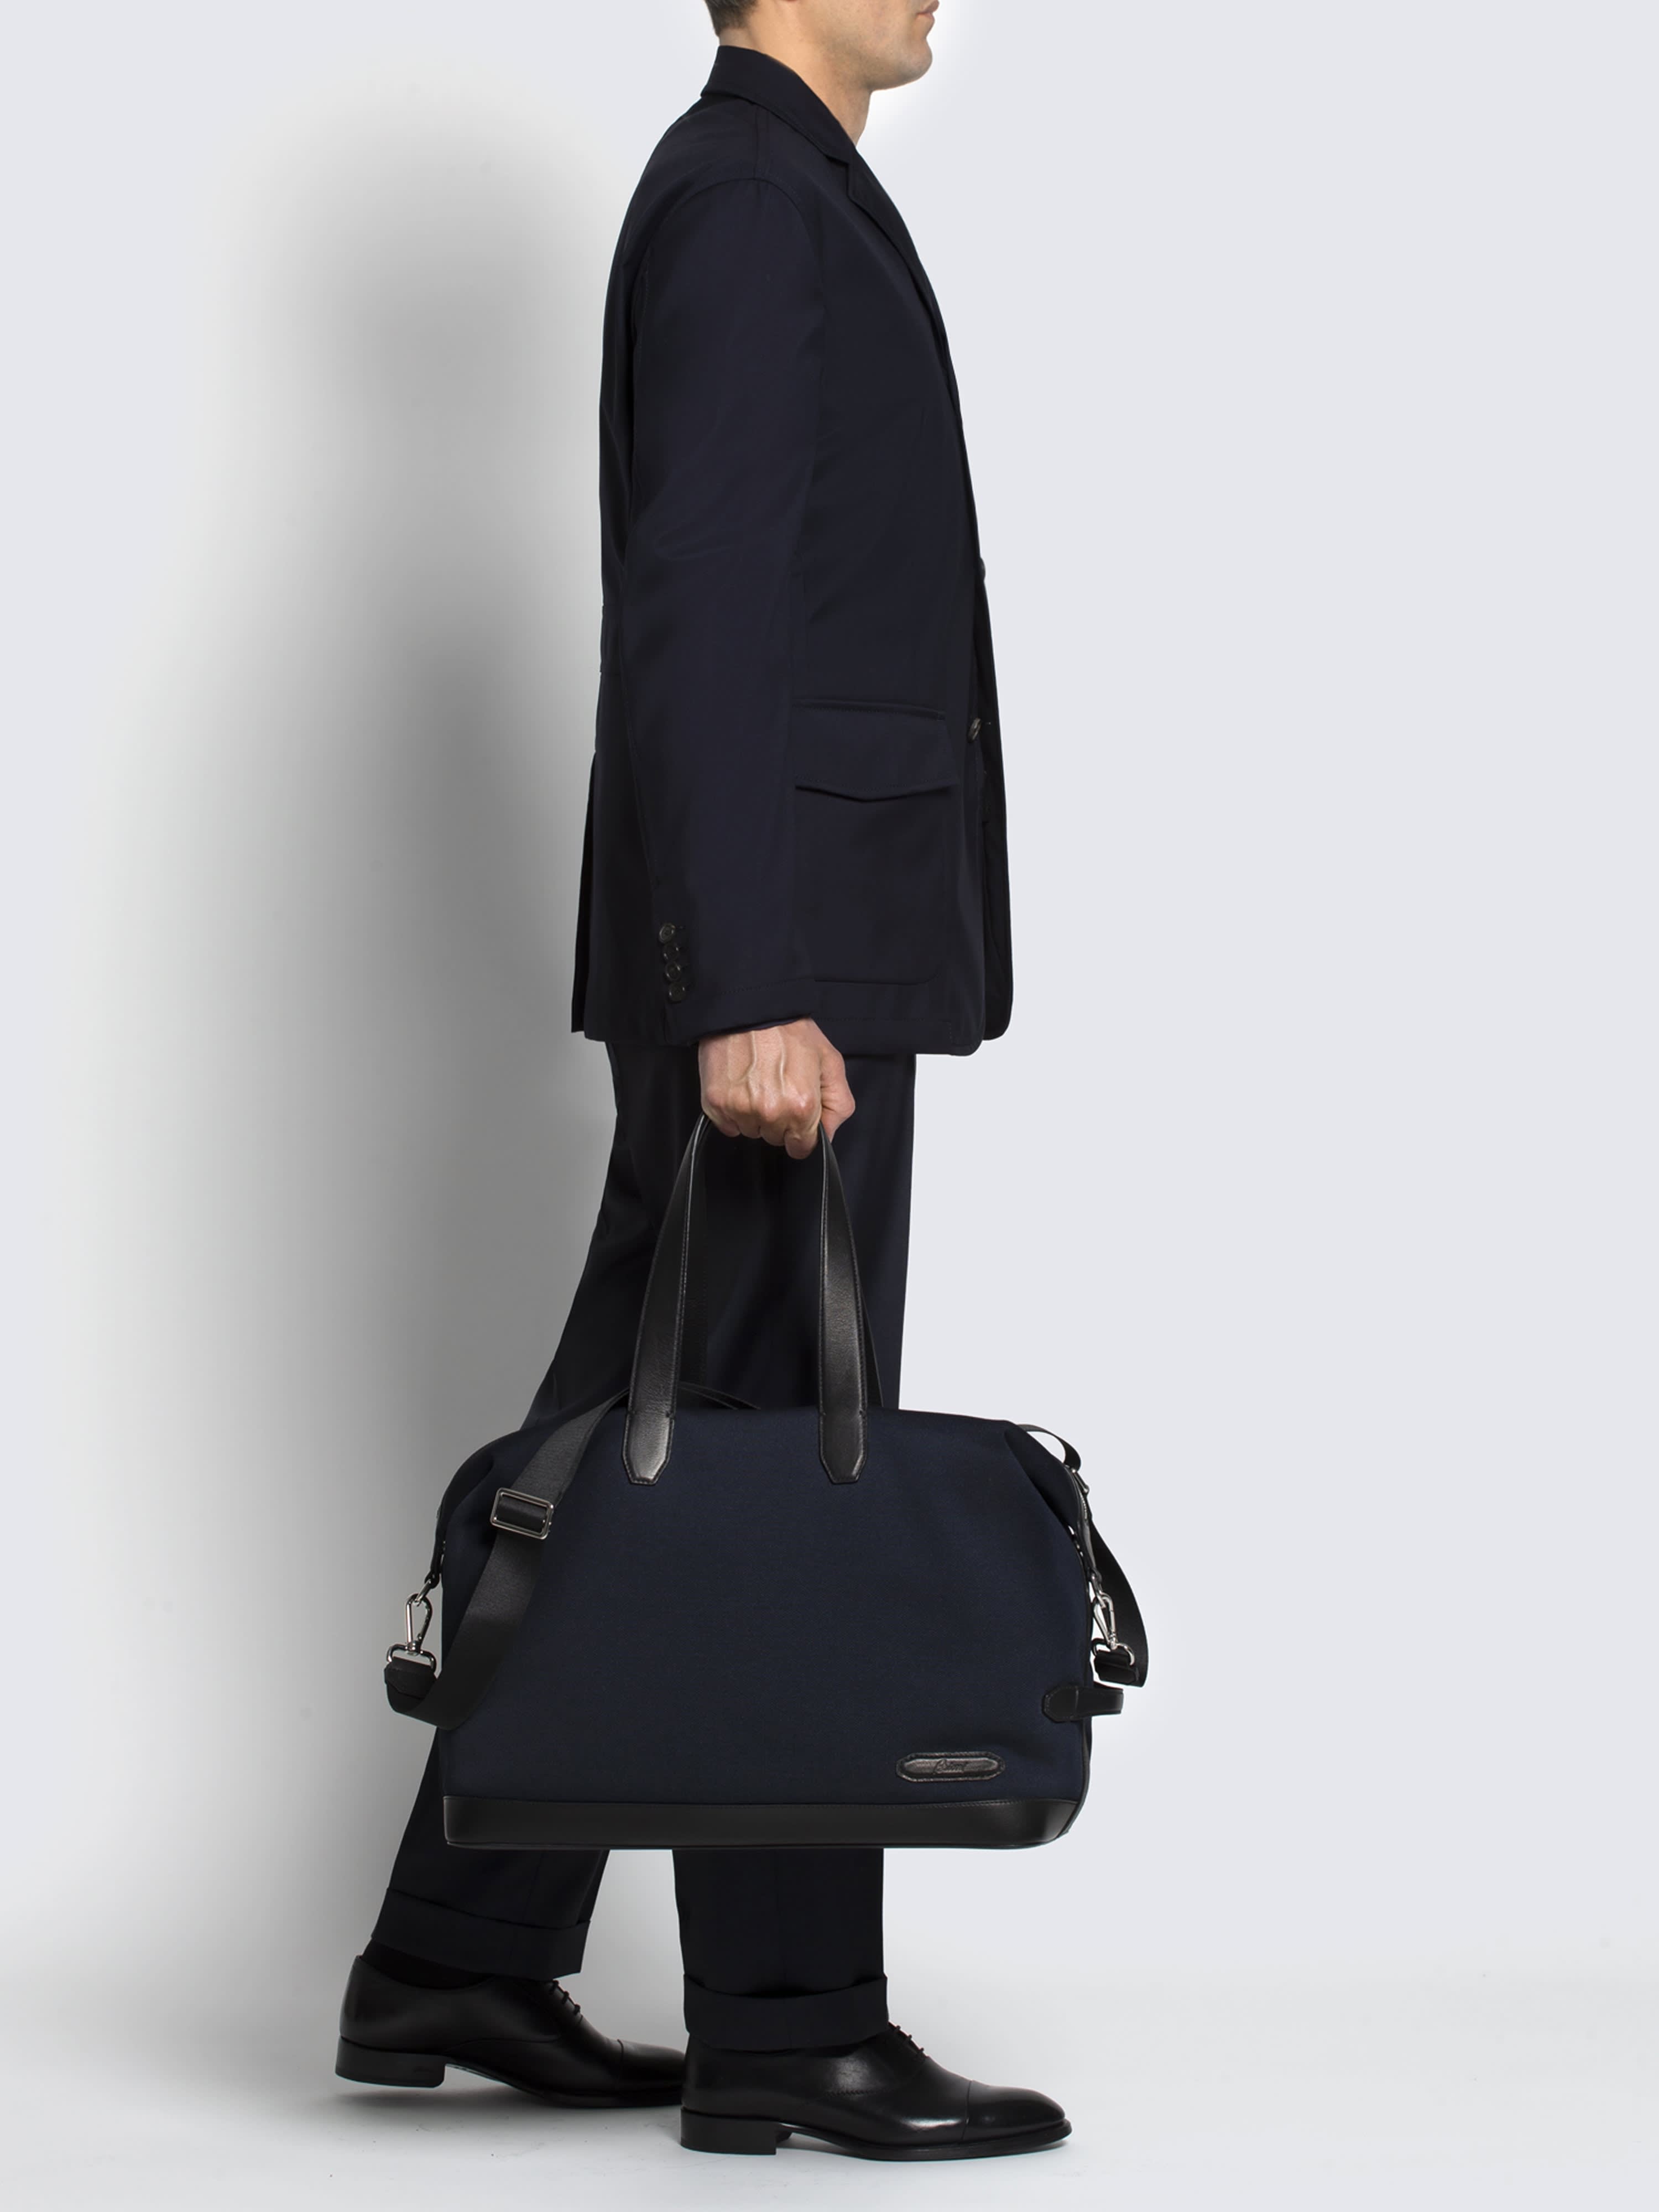 Midnight blue and black travel bag | Brioni® WW Official Store